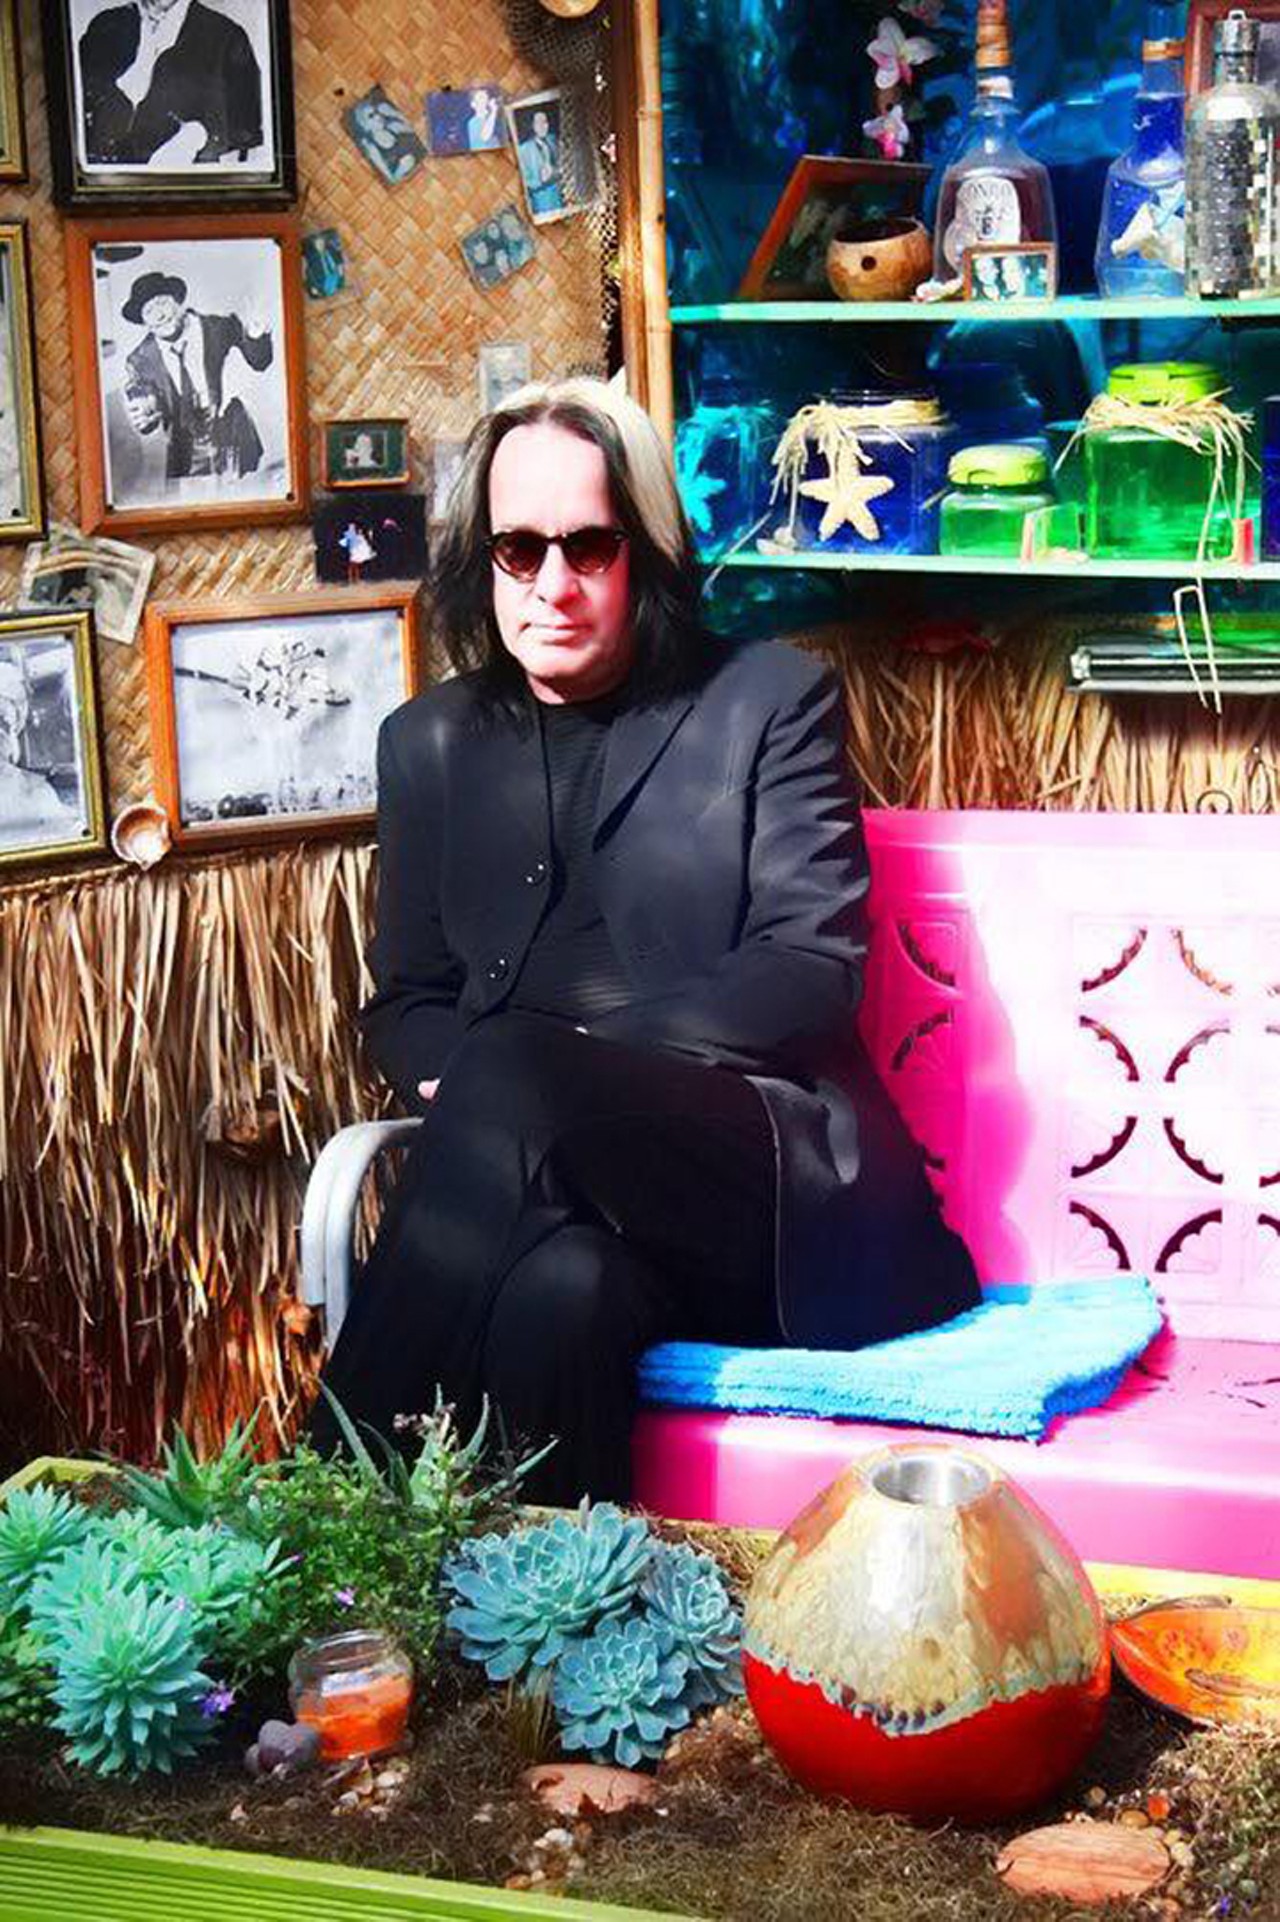 Monday, May 29Todd Rundgren at the Plaza Live